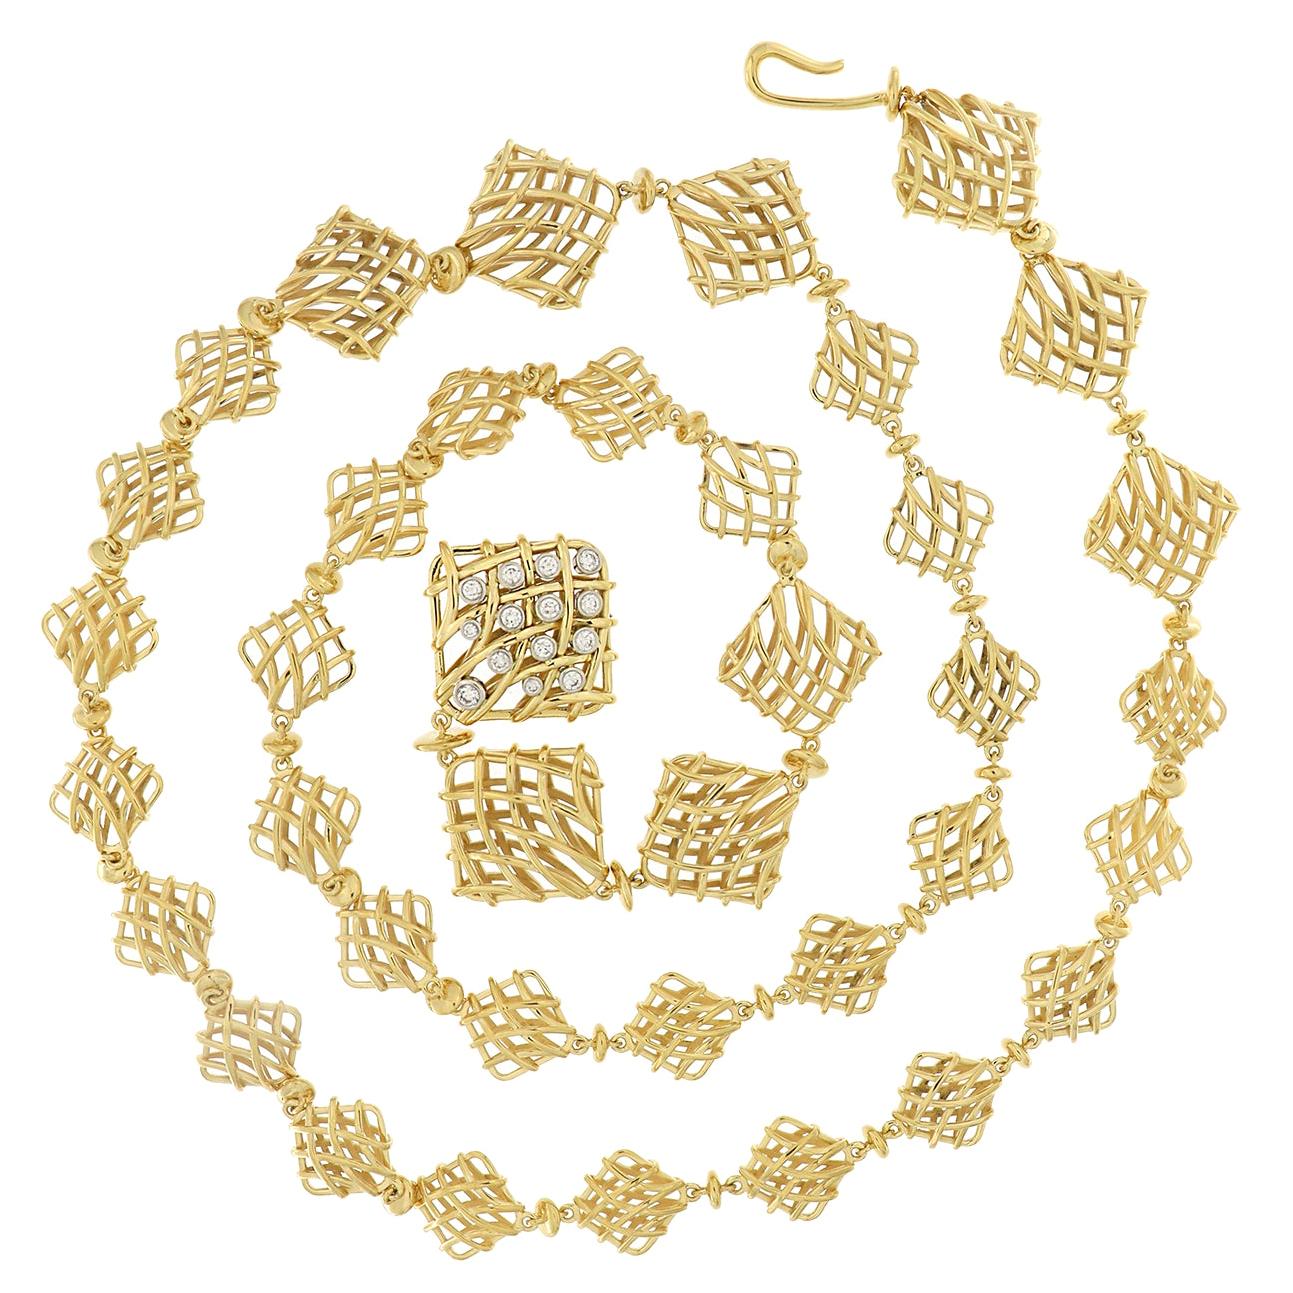 Valentin Magro Woven Cushion Shaped Necklace